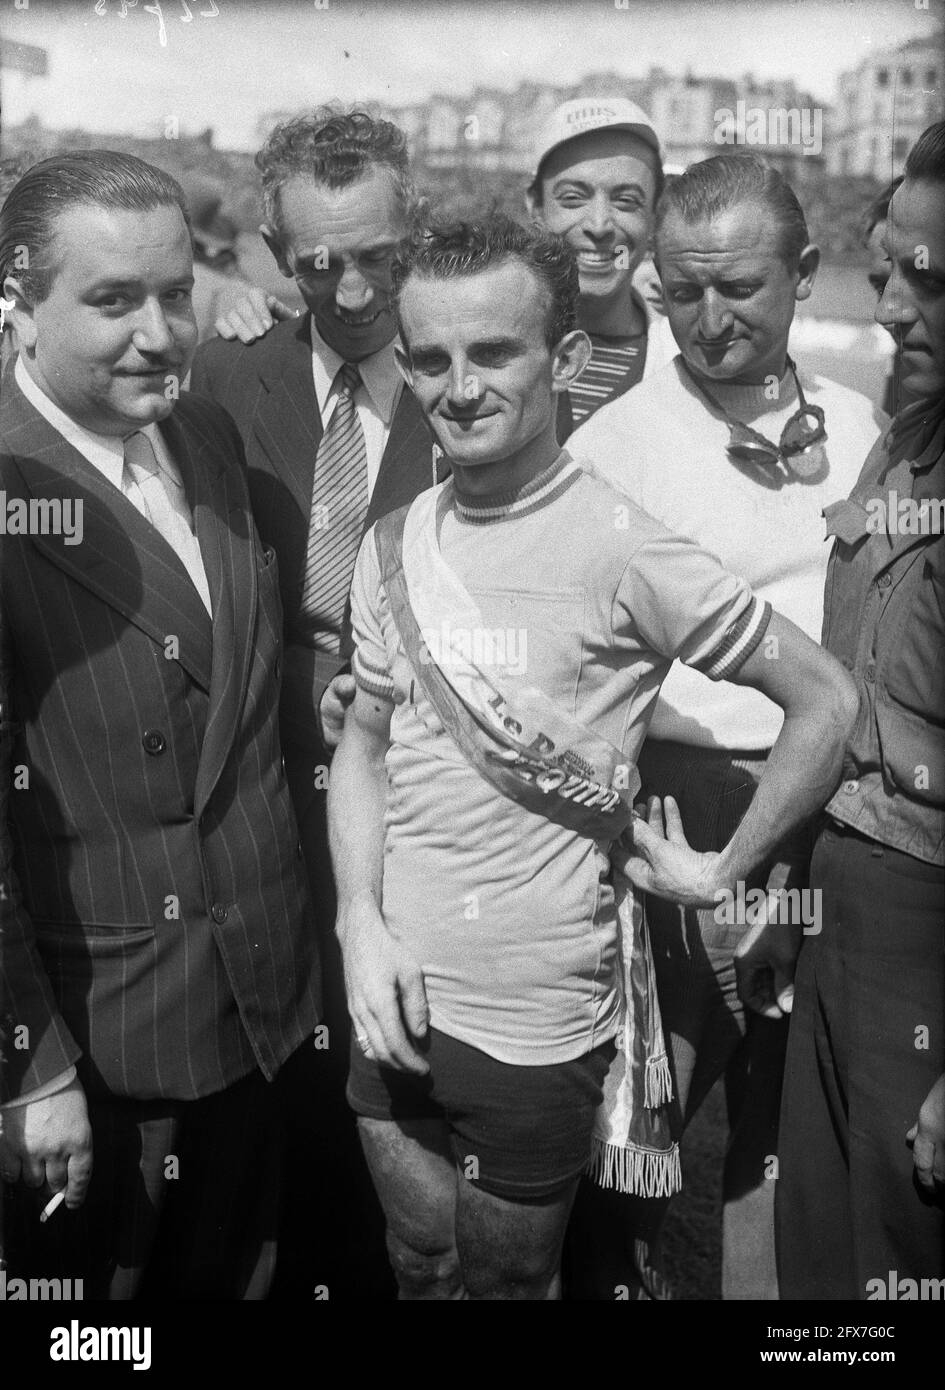 Jean Robic, winner of the 1947 Tour de France, July 18, 1947, portraits,  sports, cycling, cyclists, The Netherlands, 20th century press agency  photo, news to remember, documentary, historic photography 1945-1990,  visual stories,